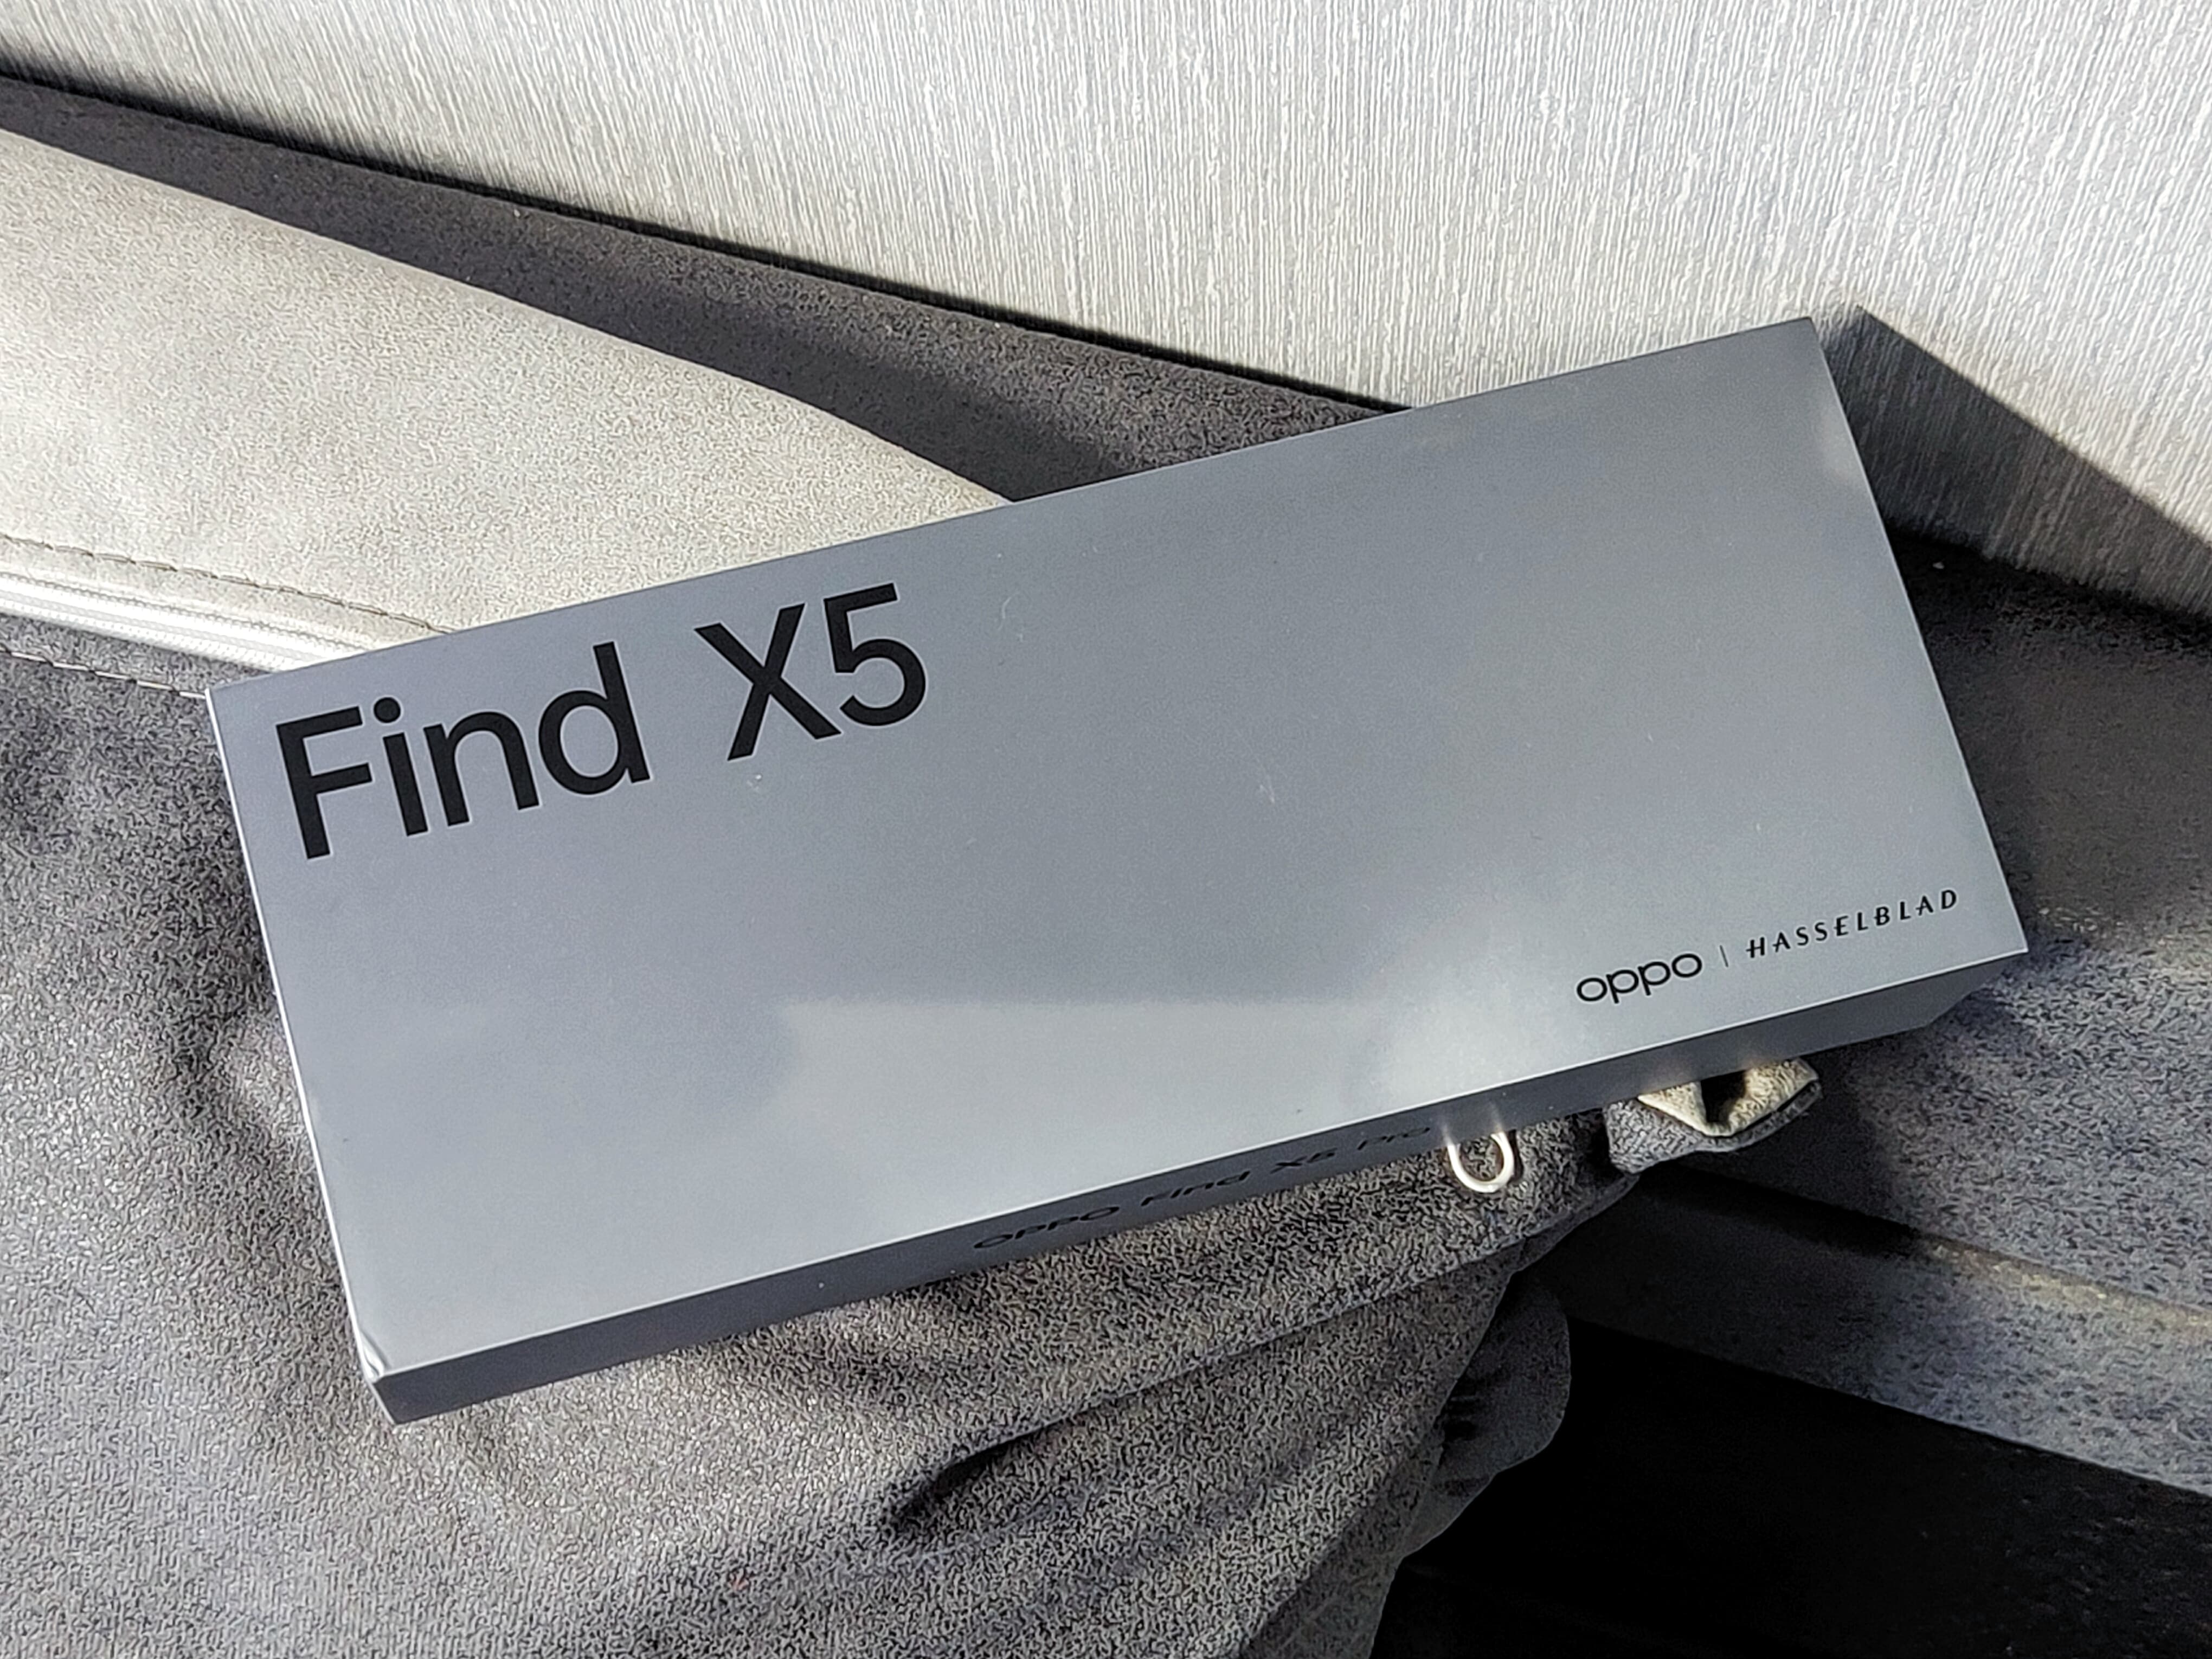 Find X5 Pro Review: the first self-developed chip helps the image strength is amazing